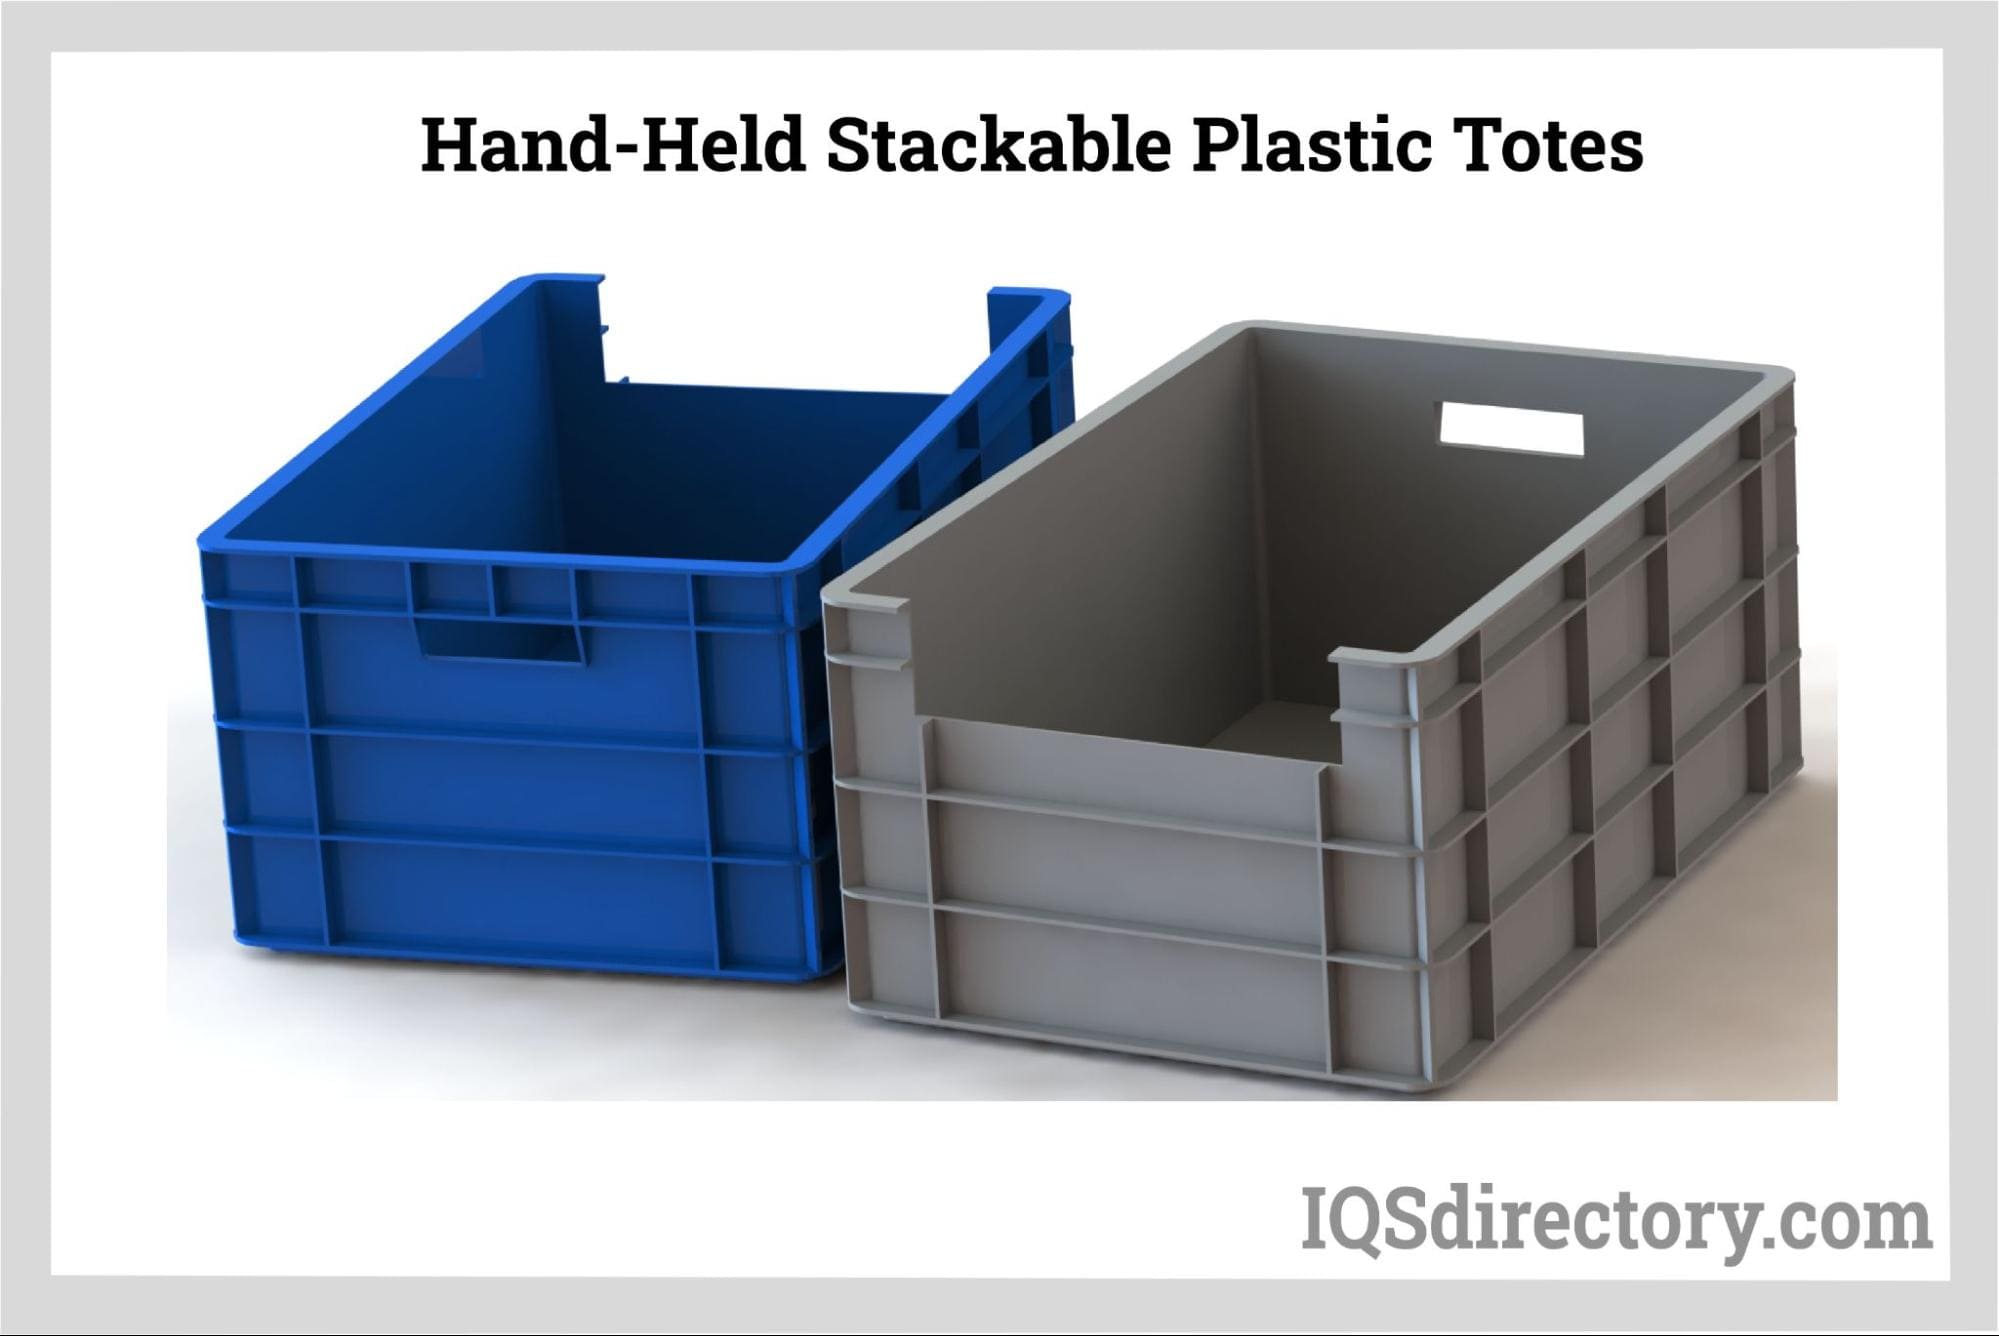 Hand-held Stackable Plastic Totes